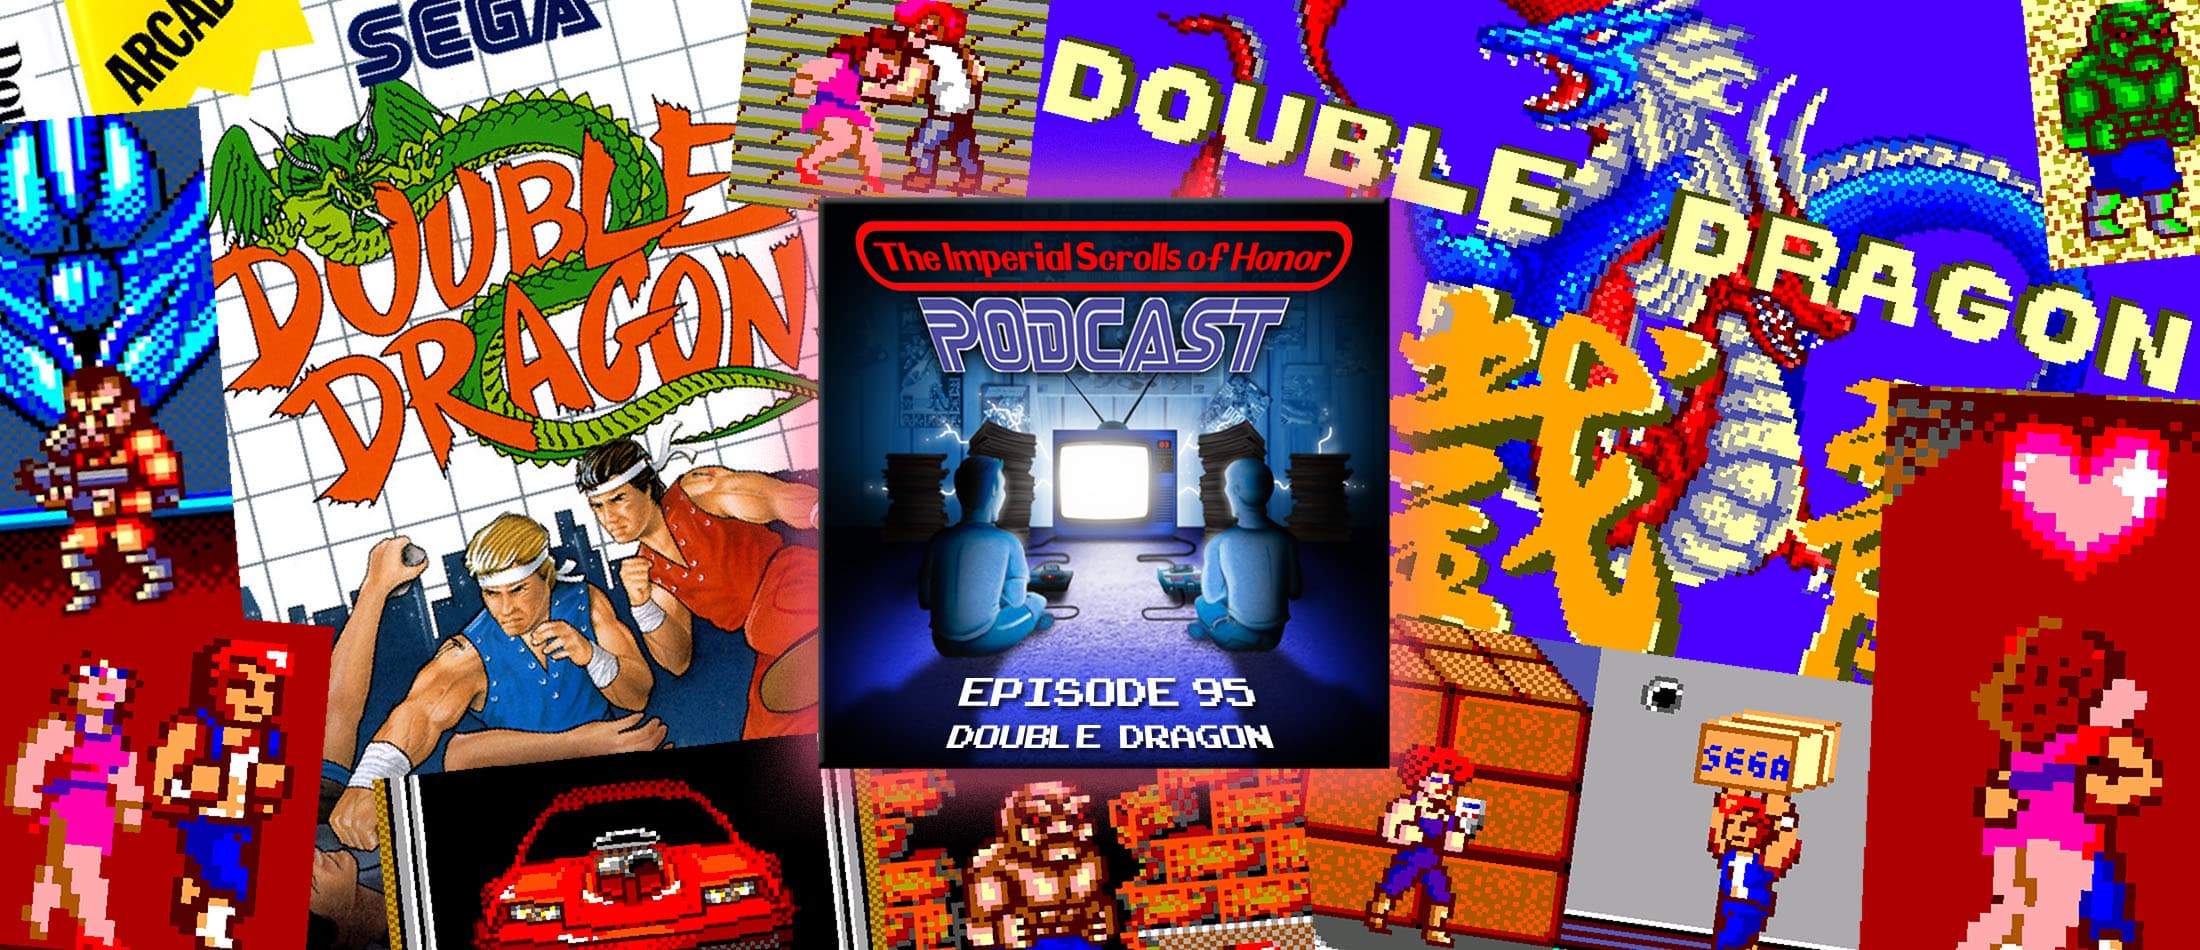 The Imperial Scrolls of Honor Podcast - Ep 95 - Double Dragon (SMS)